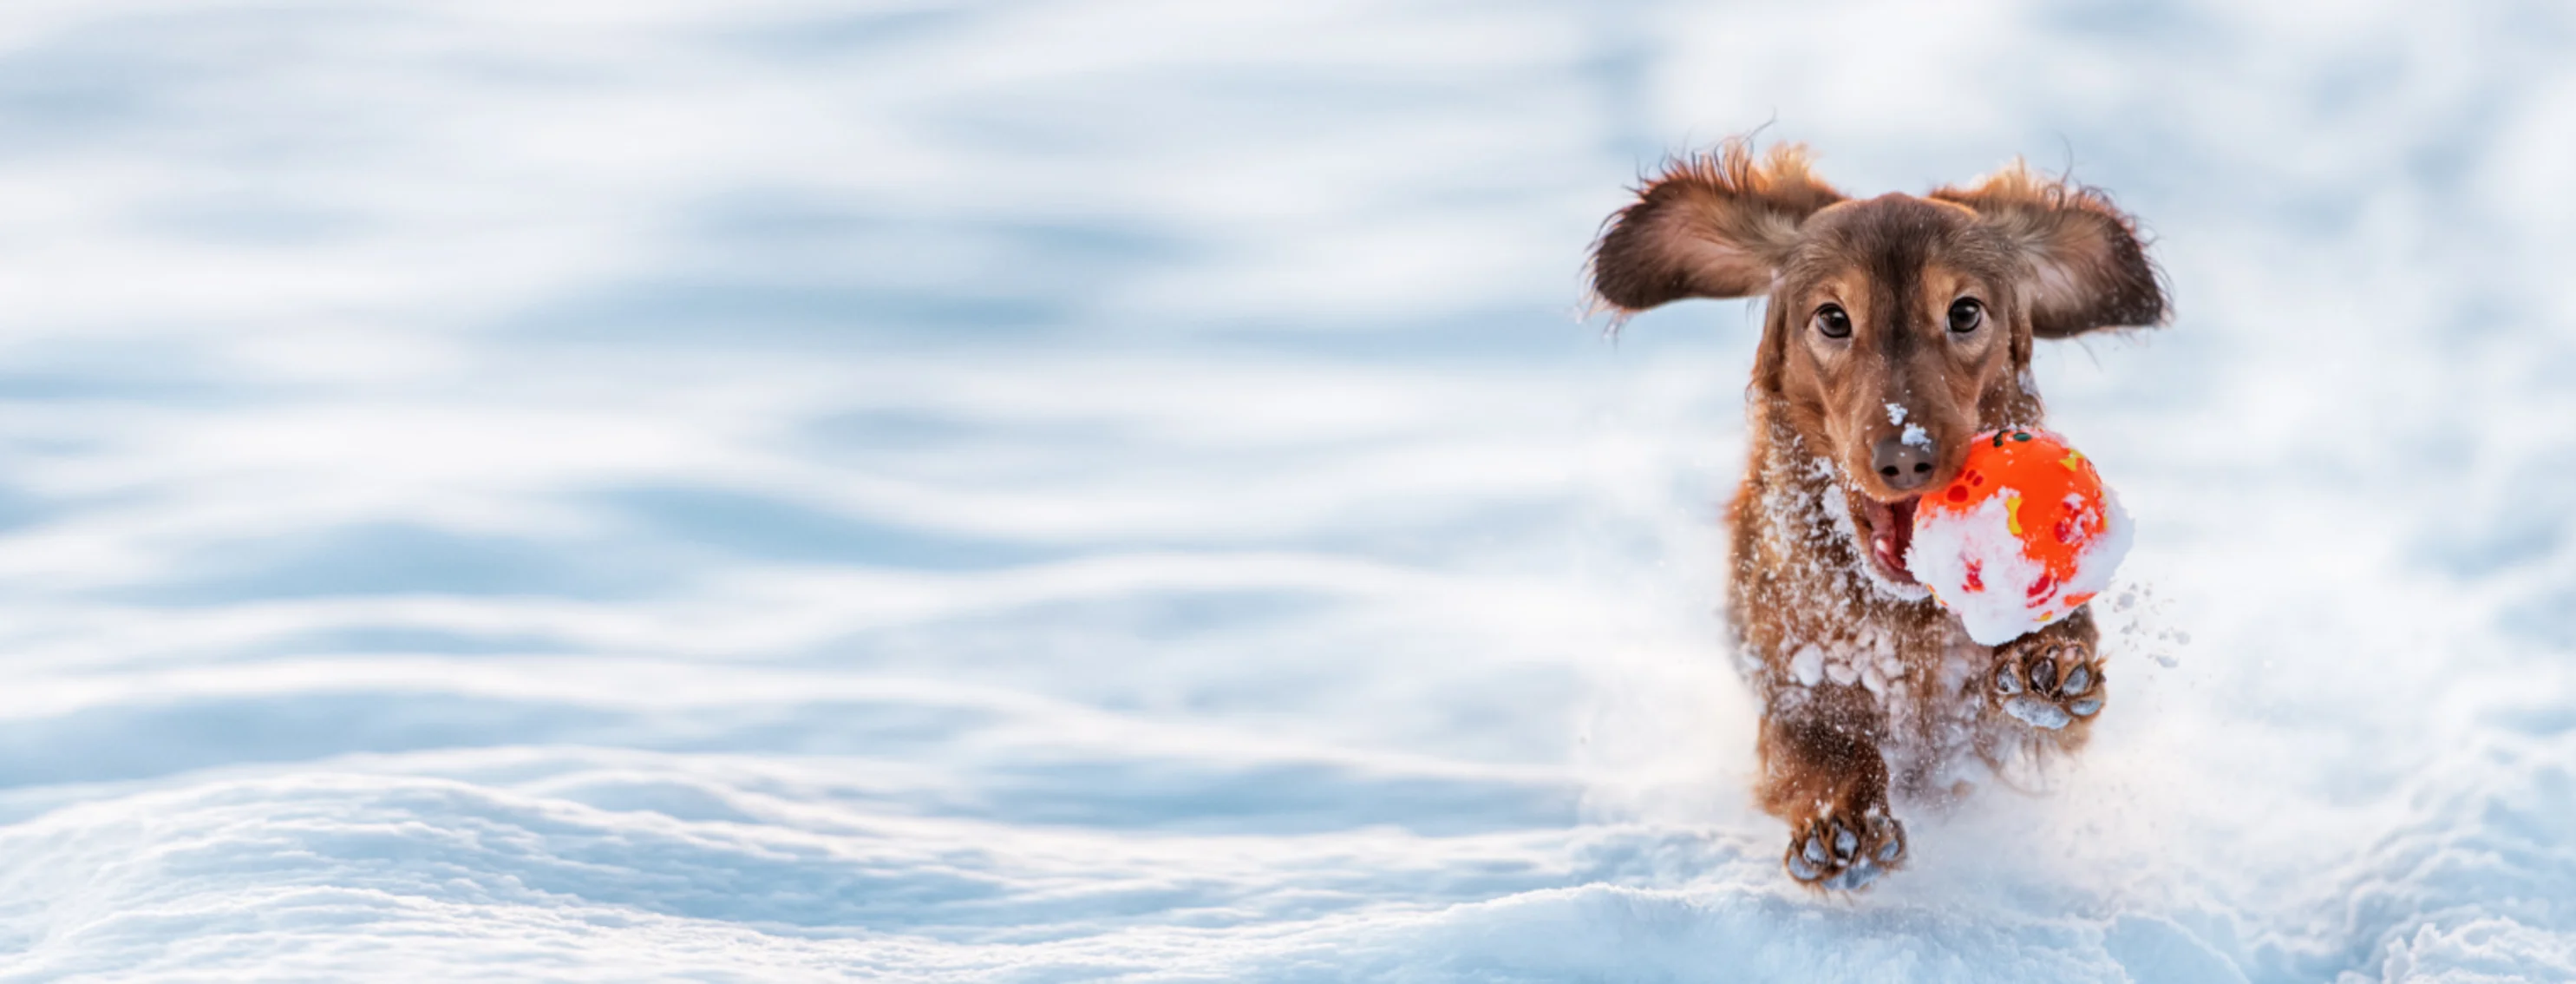 Dachshund running in snow with a ball